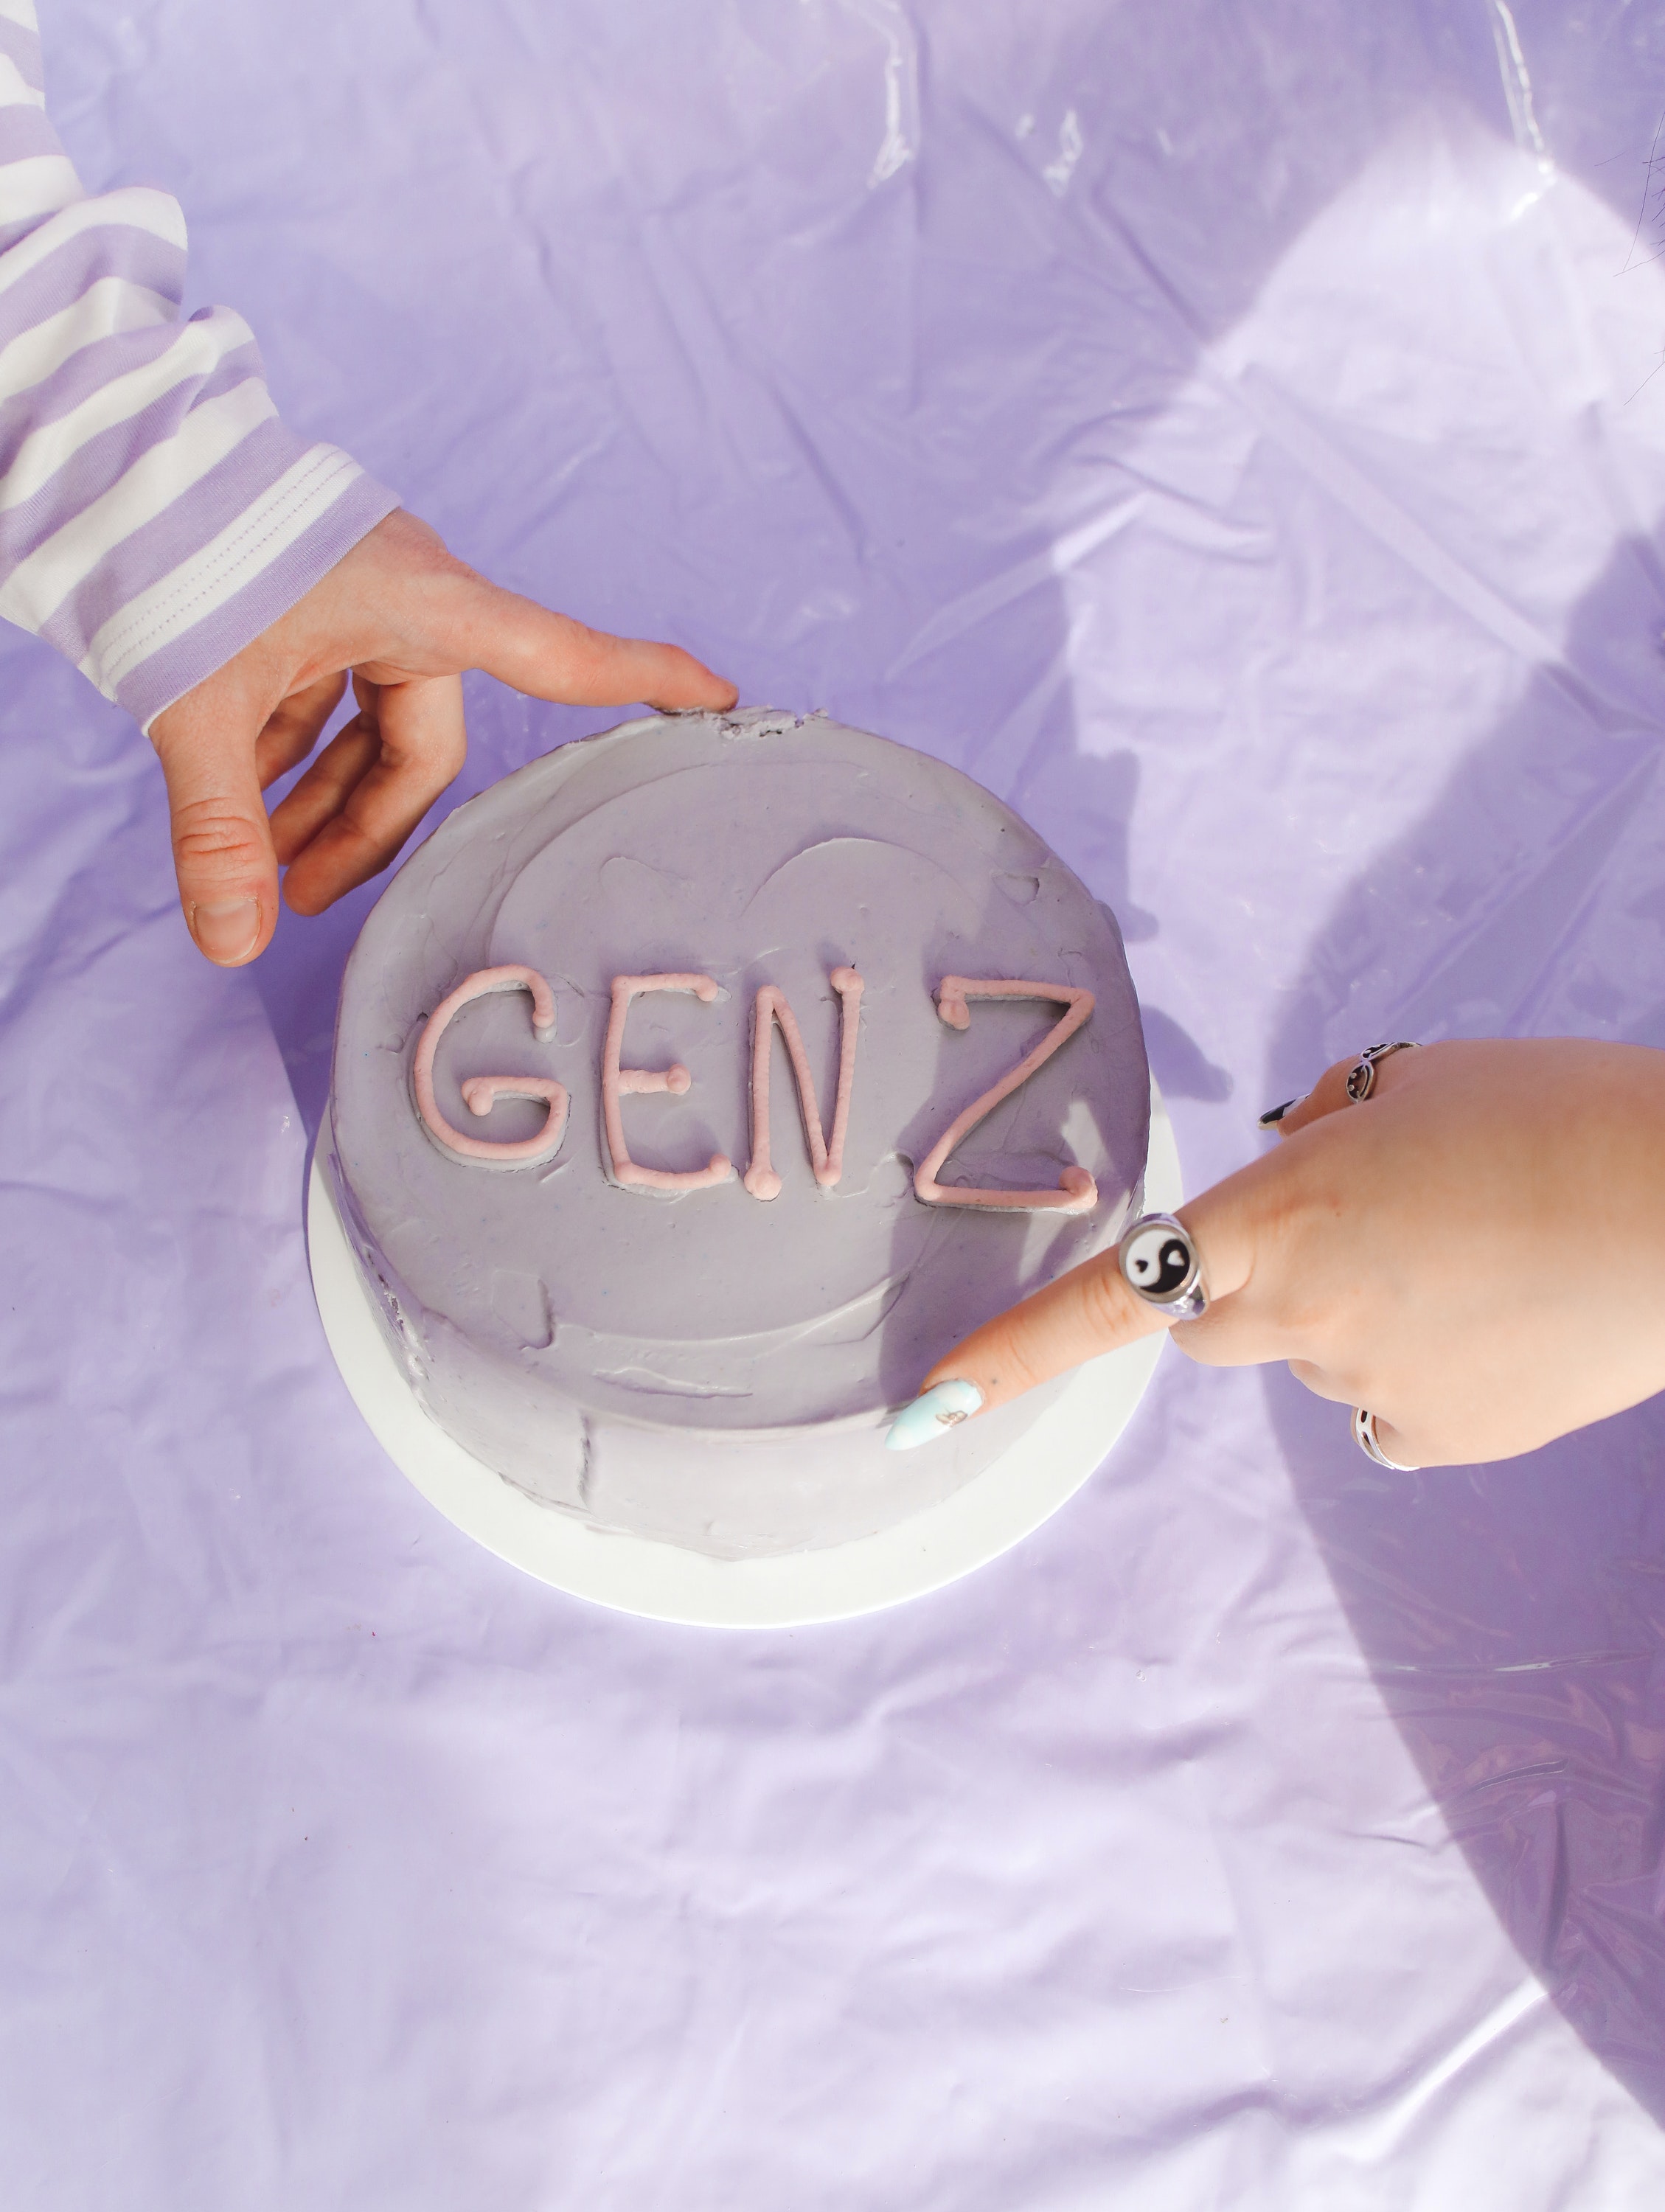 How to Design Websites for Gen-Z with the GeekPower Advantage